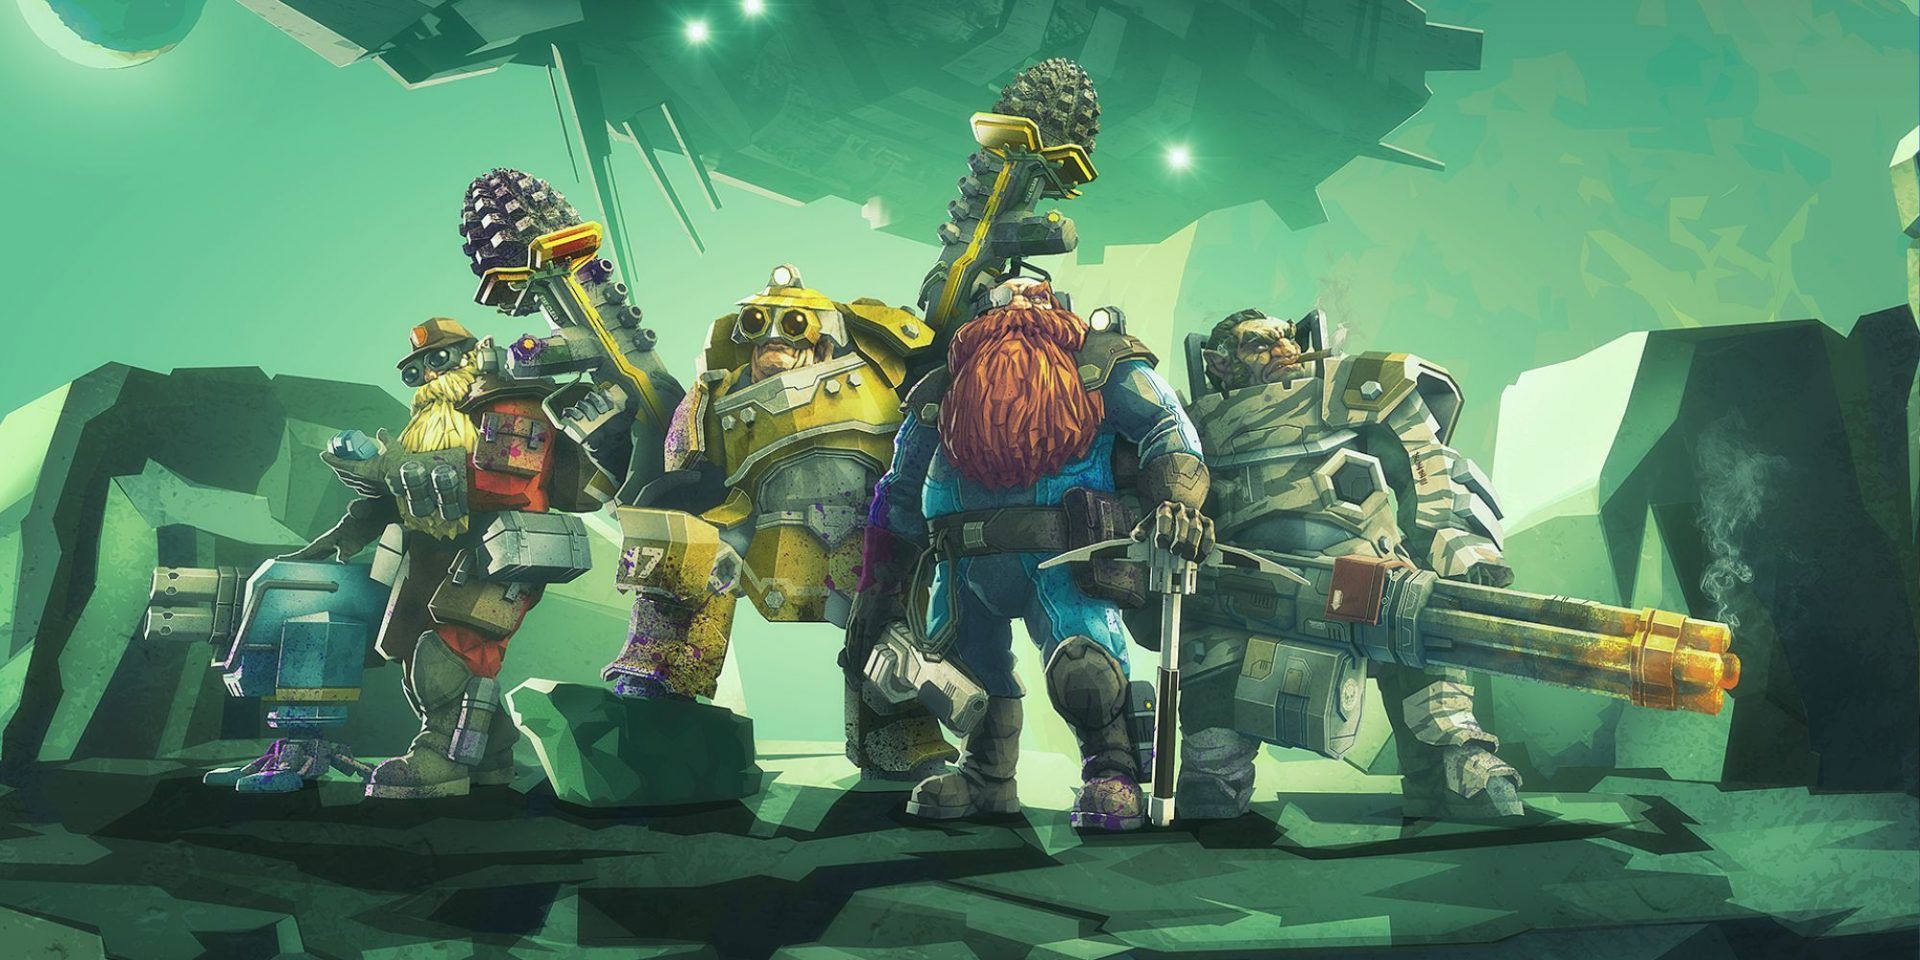 Artwork of four Space Dwarves from the game Deep Rock Galactic.